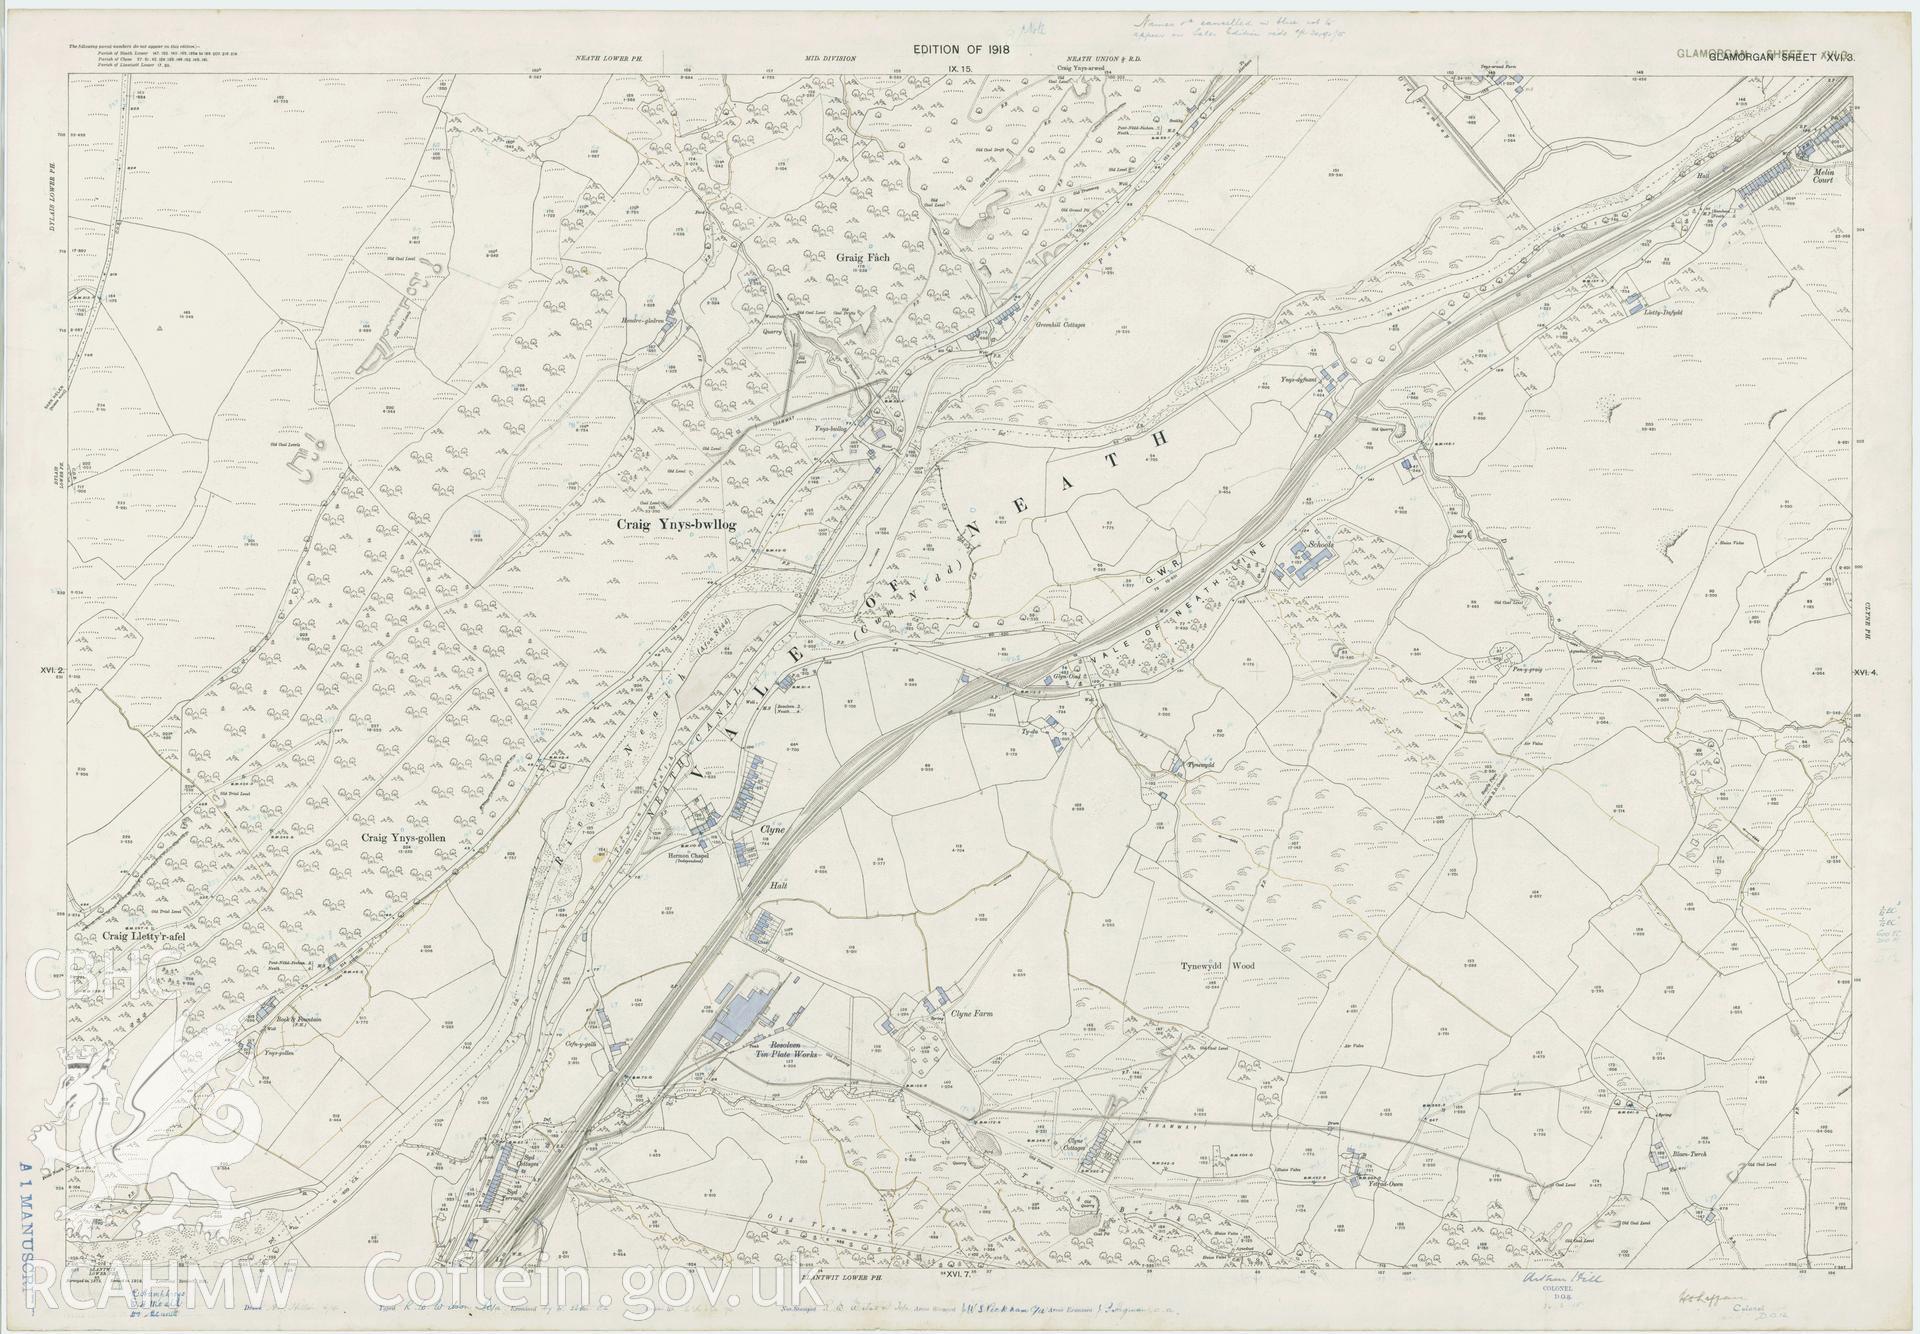 Digitized copy of Ordnance Survey 25 inch 1918 edition map of the Vale of Neath area.